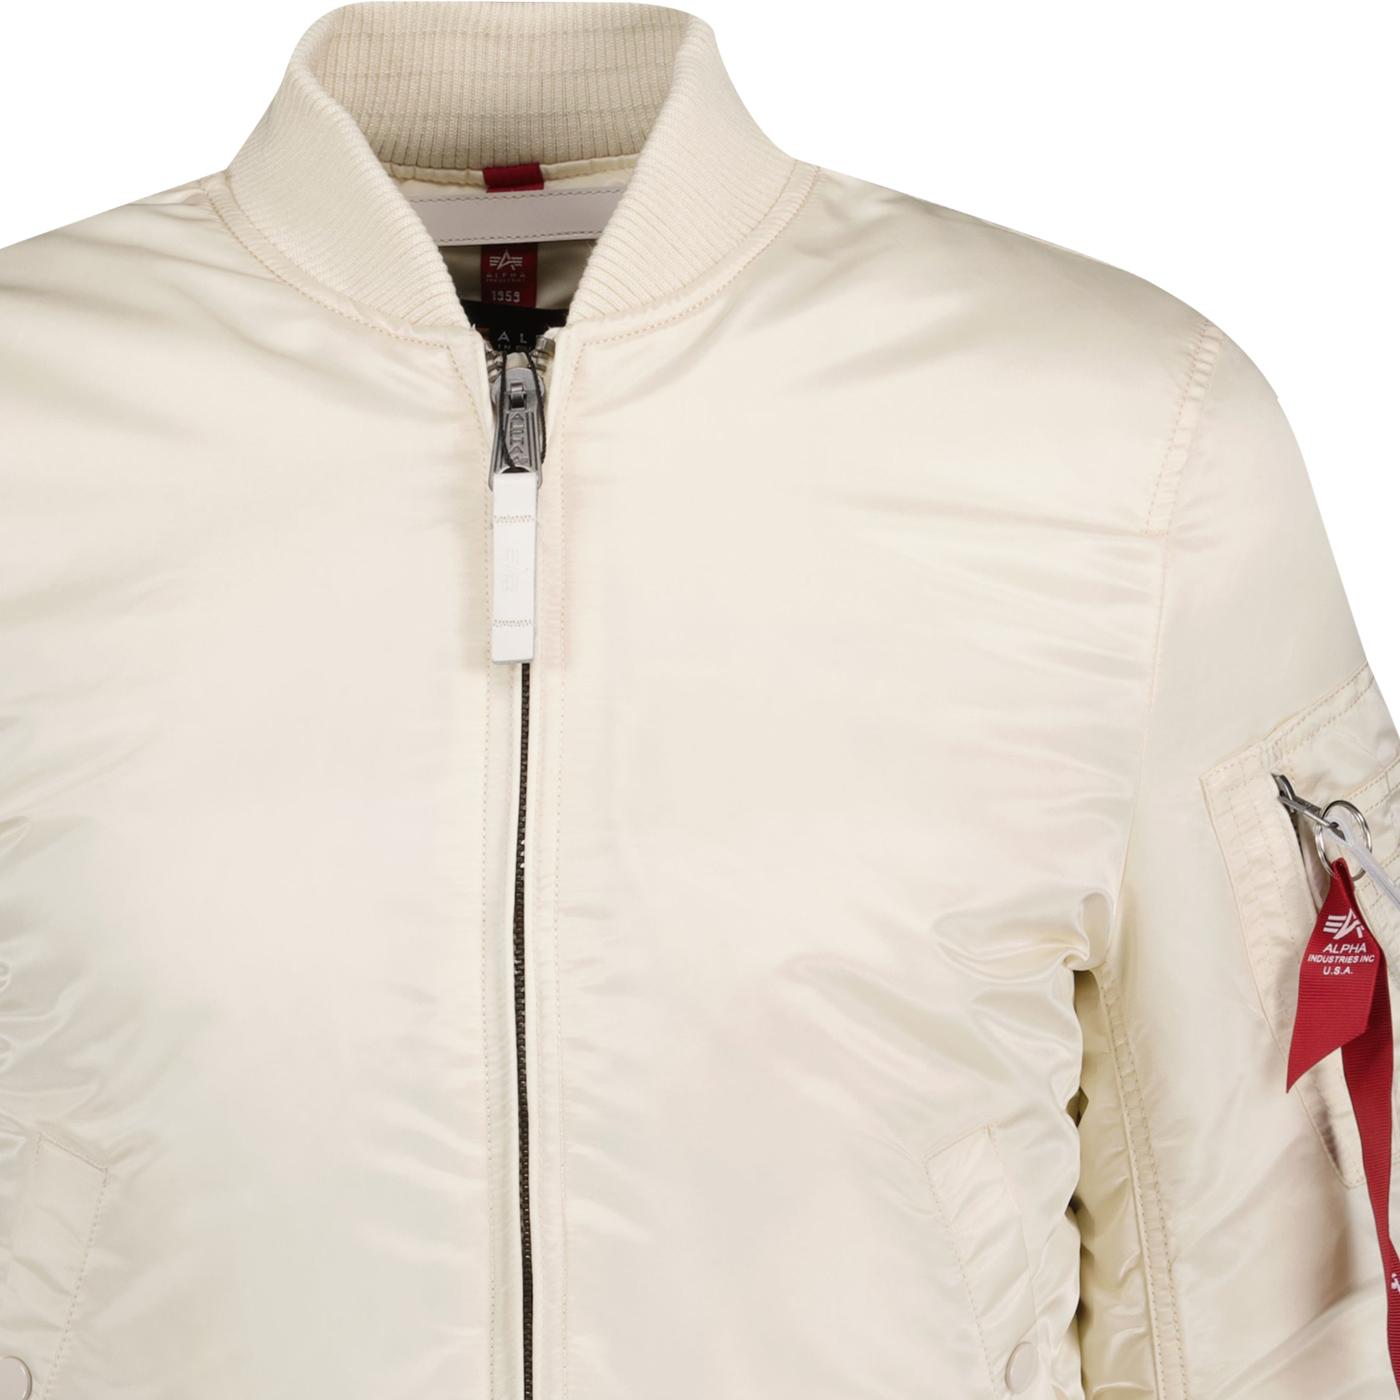 VF Mod in ALPHA MA1 Jacket Industries Stream Bomber White